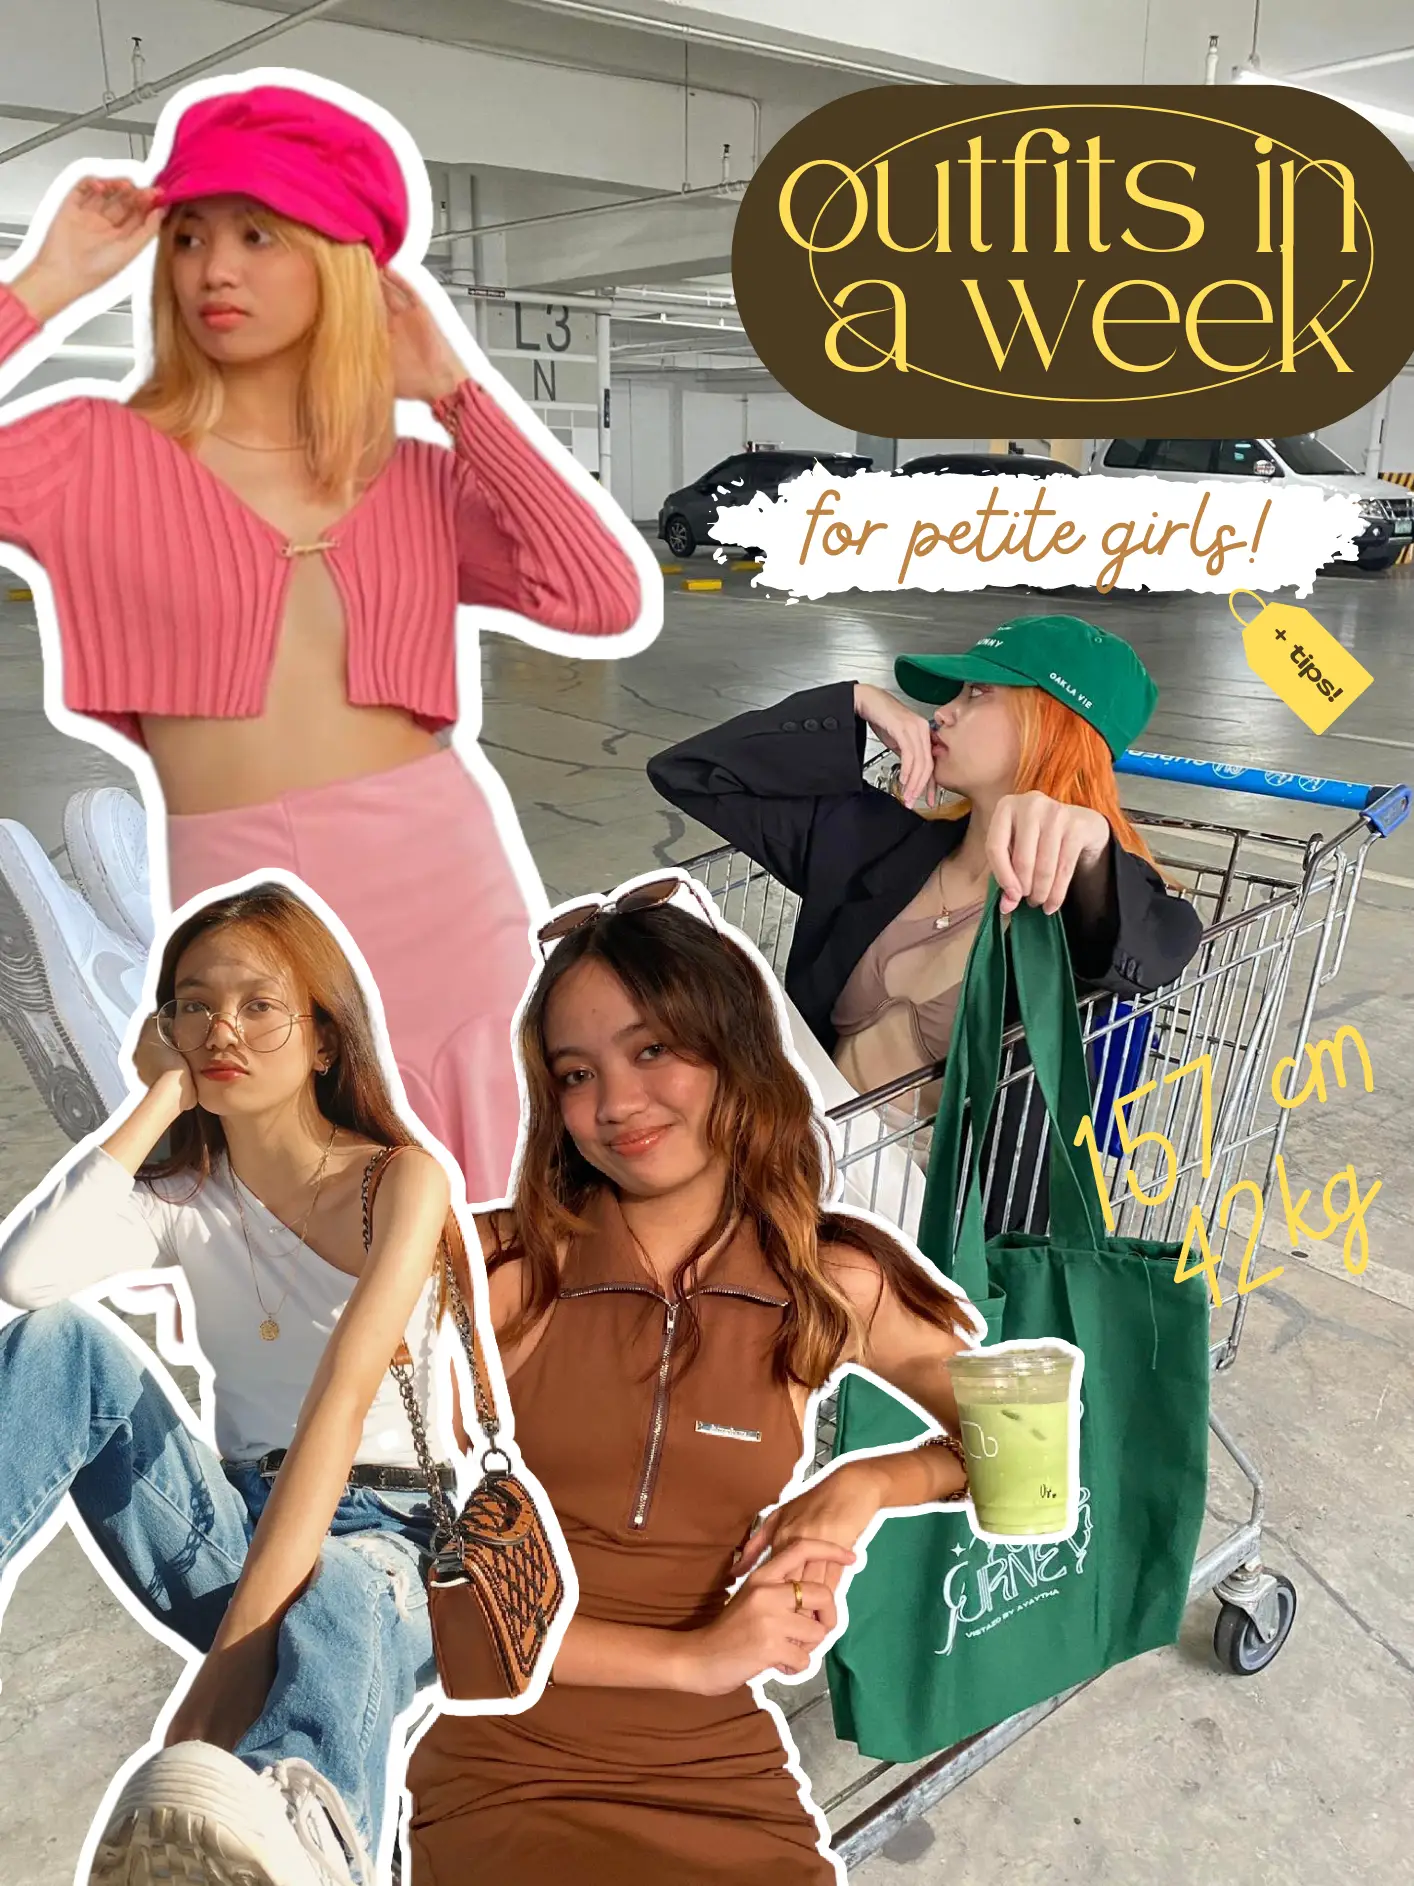 OUTFIT IN A WEEK FOR PETITE GIRLS (+ Fashion Tips)